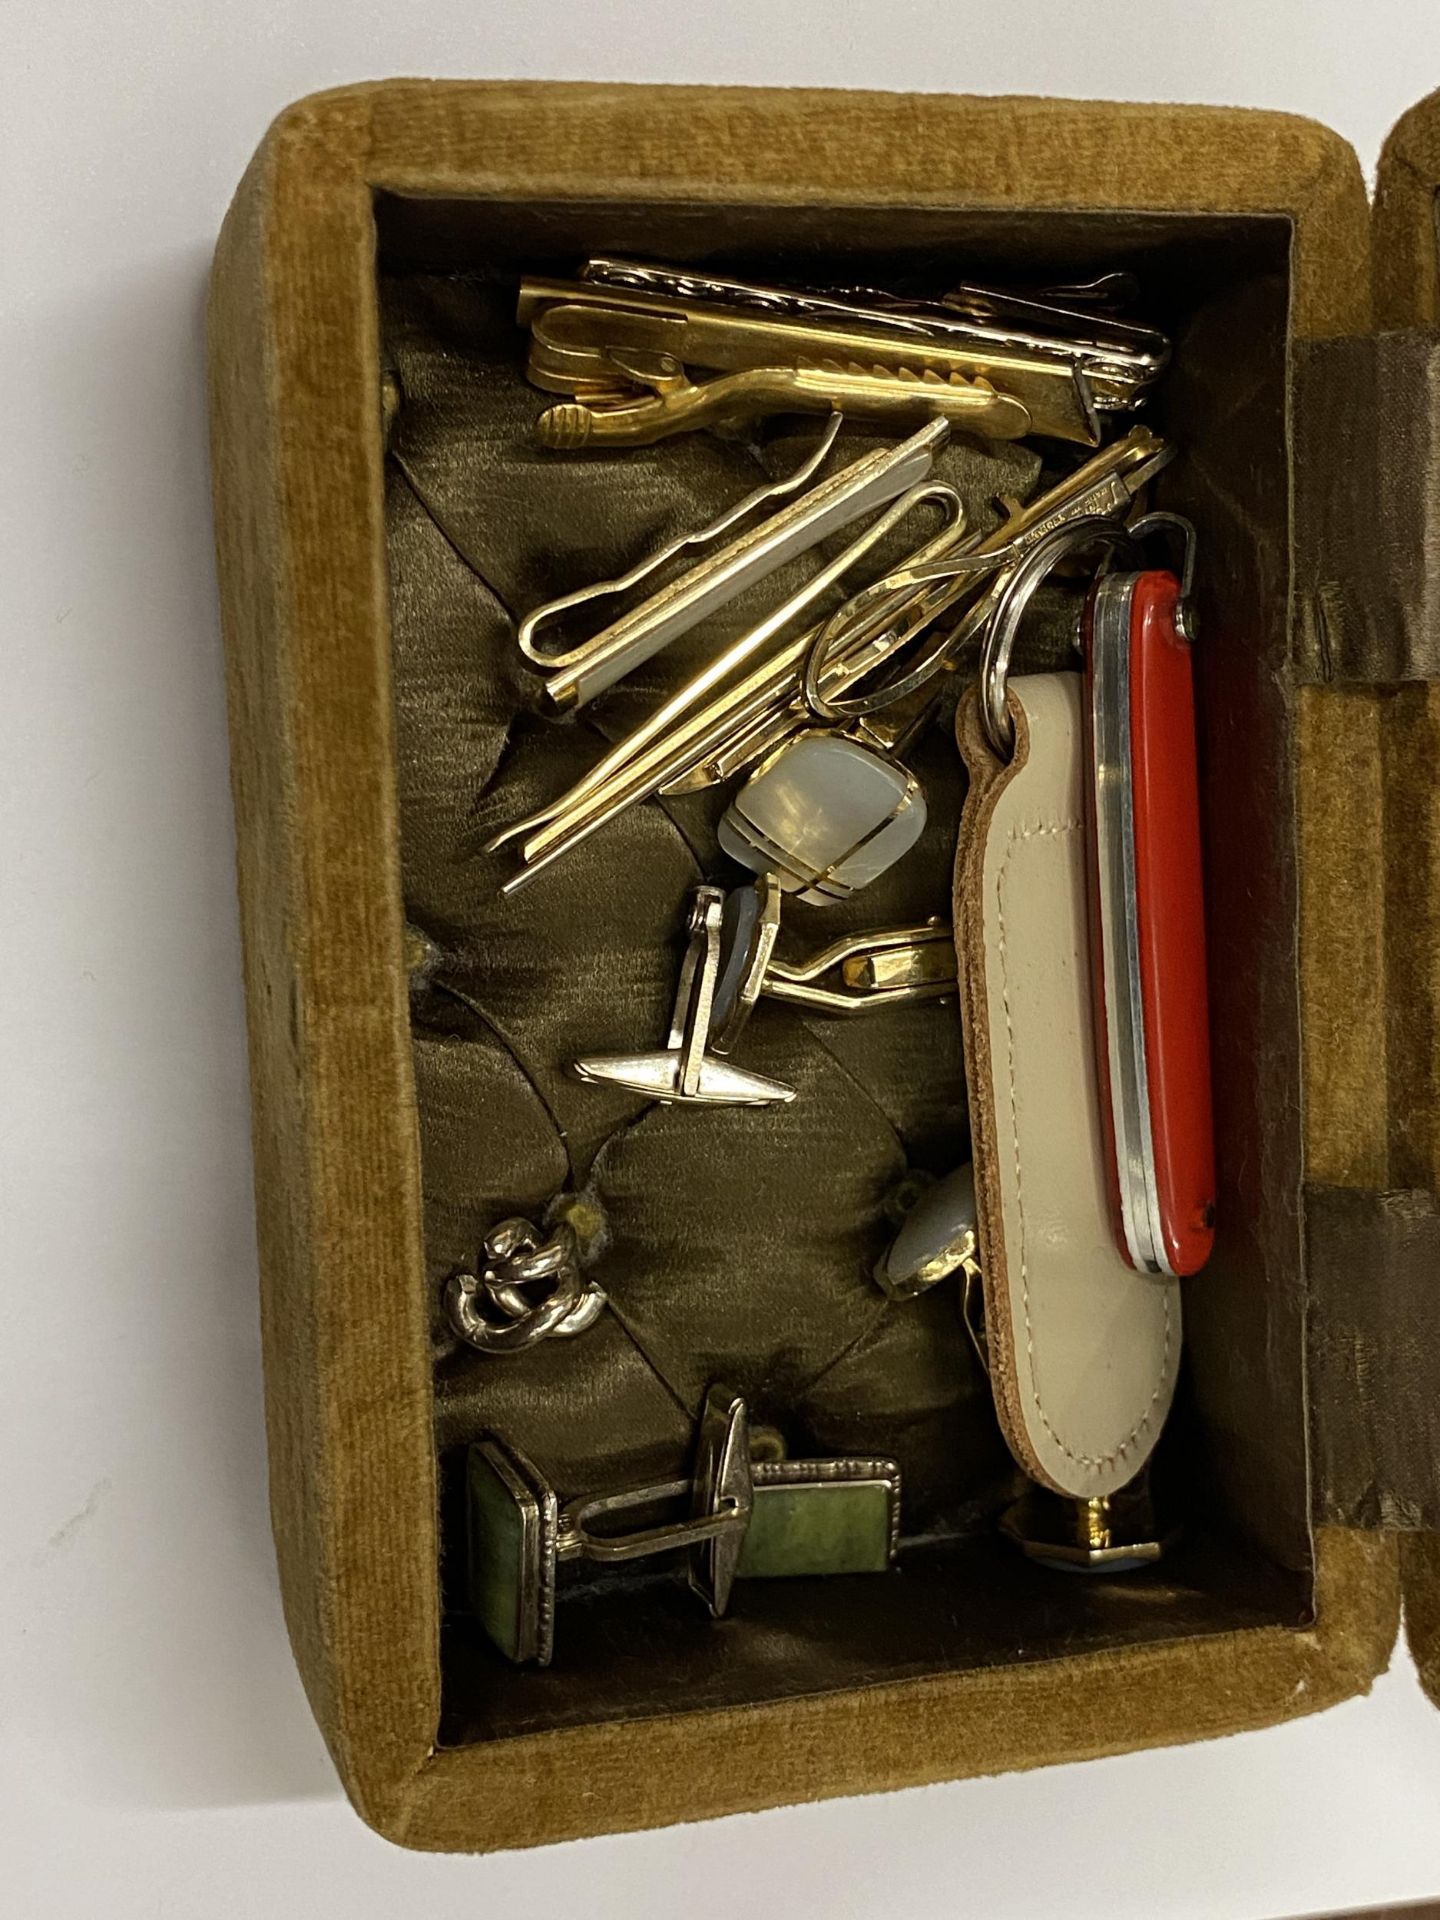 A BOX OF VINTAGE CUFFLINKS AND TIE CLIPS - Image 2 of 4